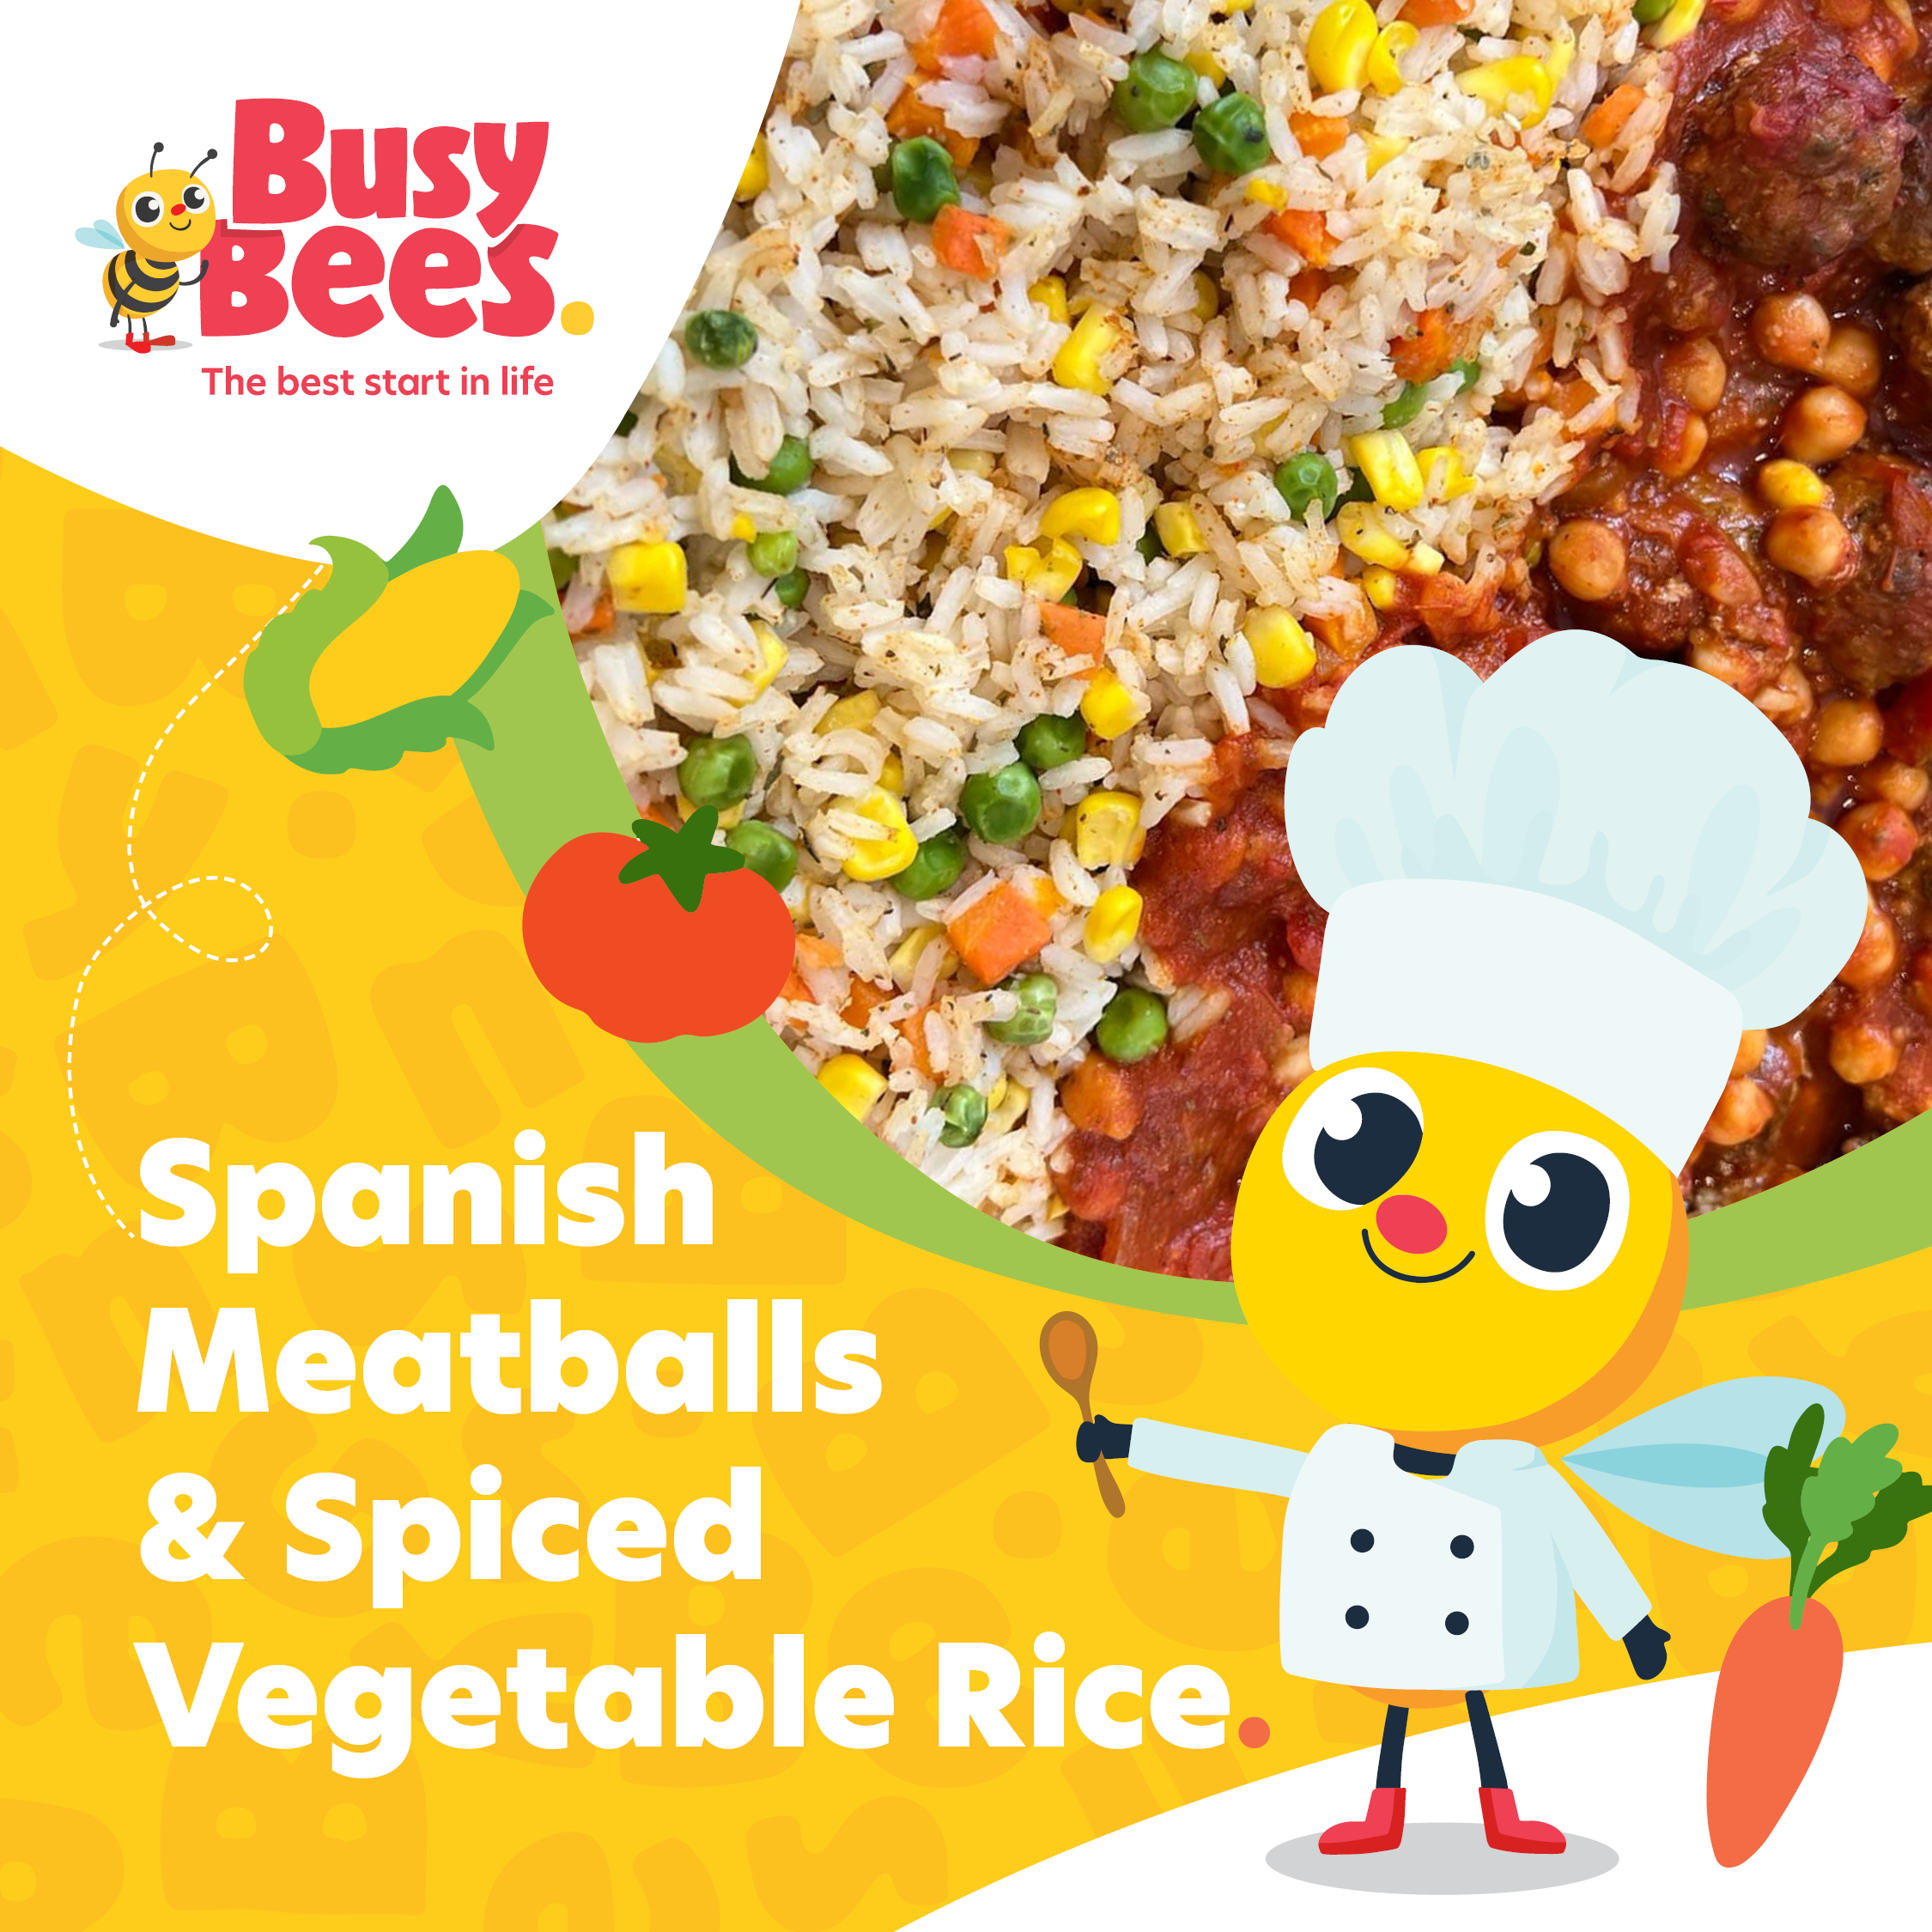 Spanish meatballs and spiced vegetable rice